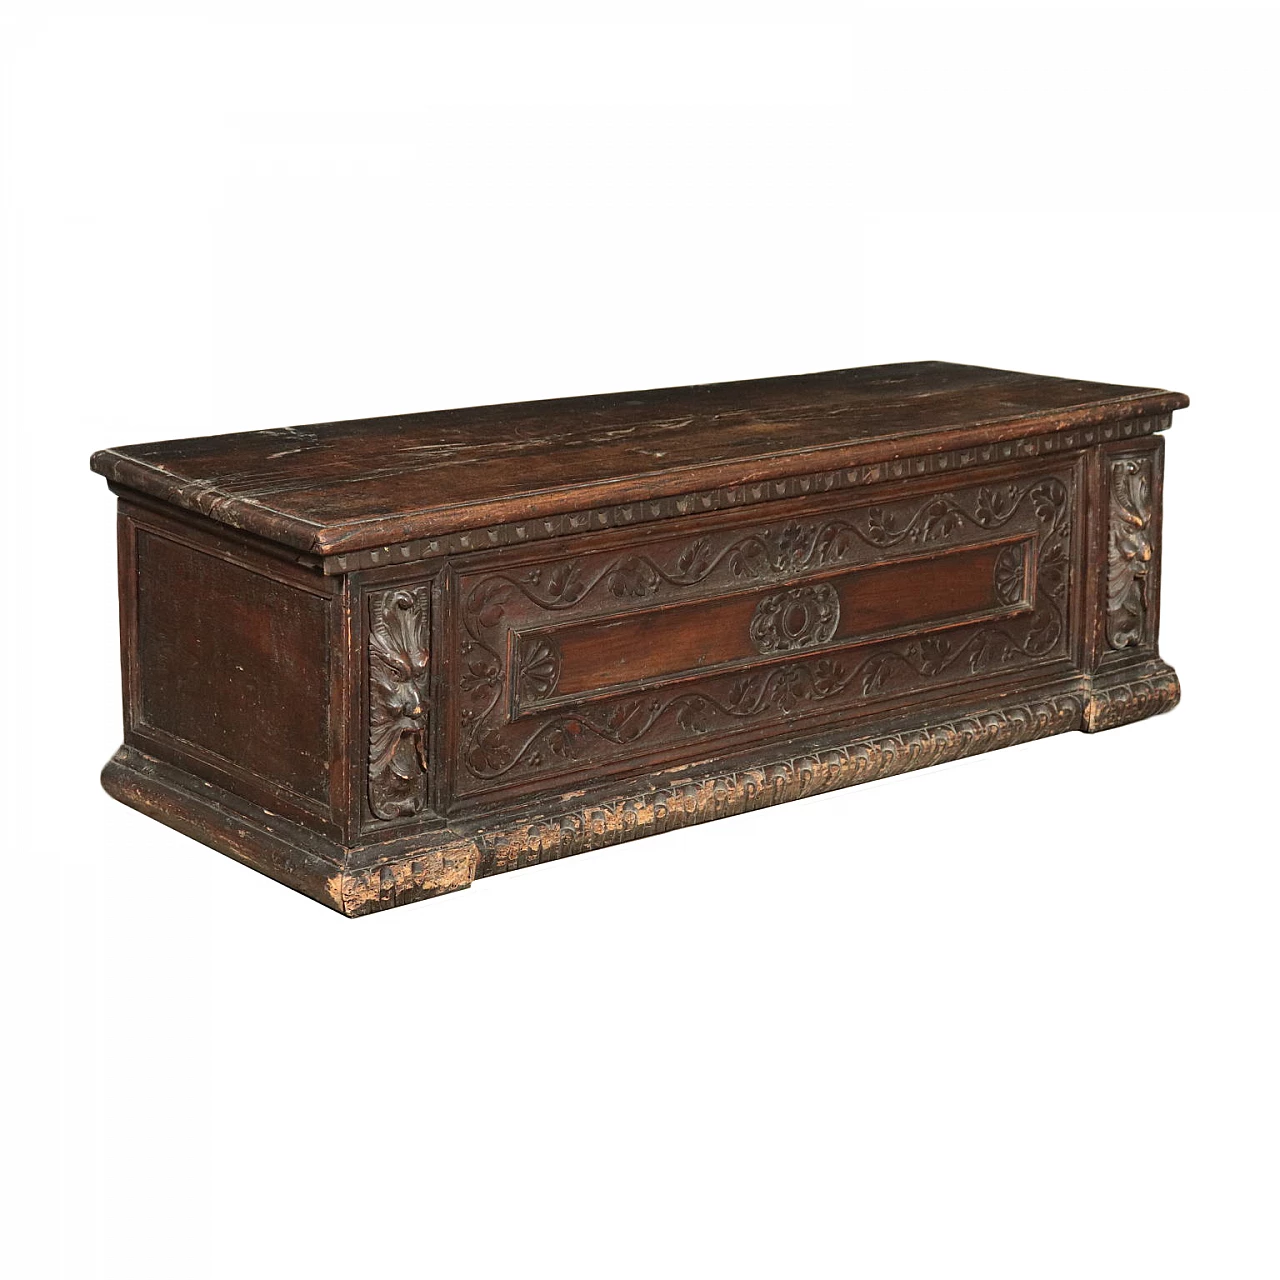 Baroque chest in walnut with grotesque carvings, '600 1